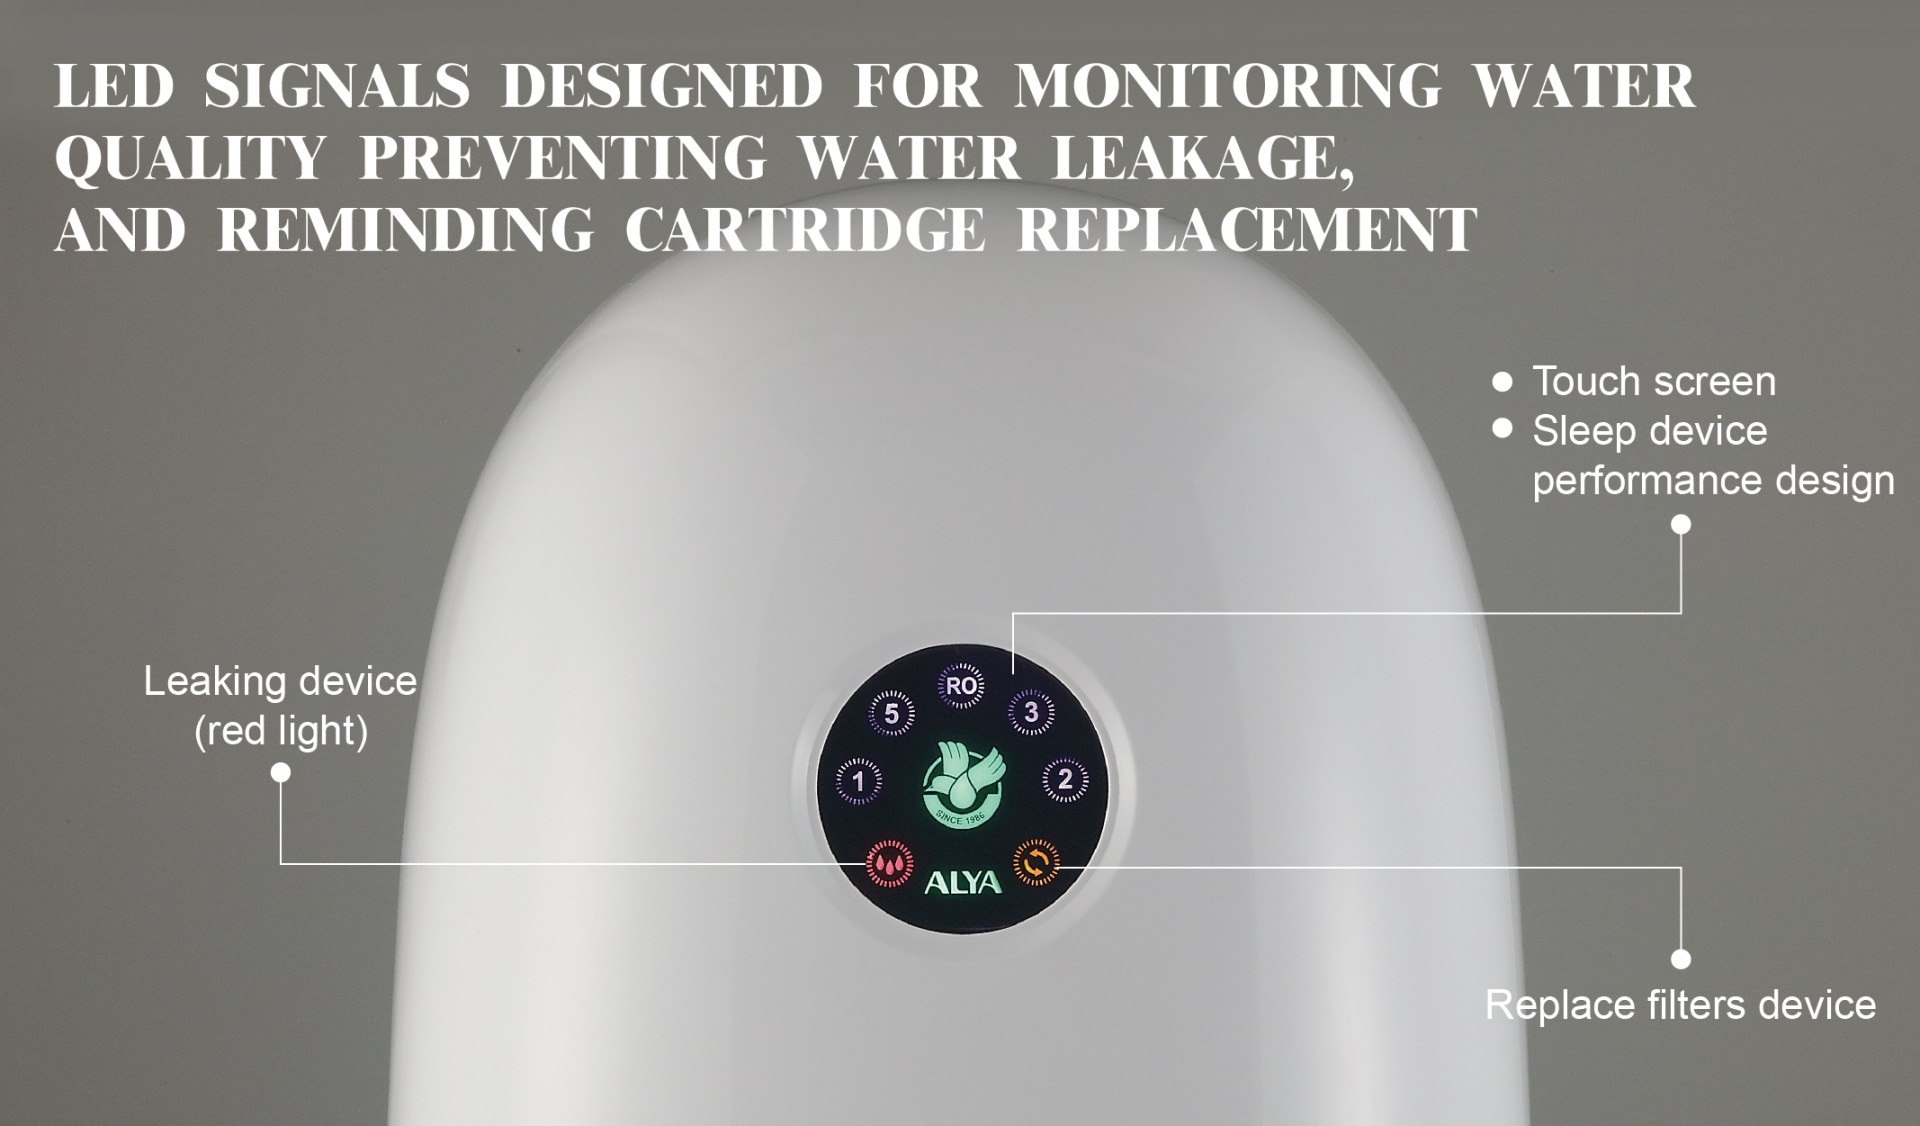 LED SIGNALS DESIGNED FOR MONITORING WATER QUALITY PREVENTING WATER LEAKAGE, AND REMINDING CARTRIDGE REPLACEMENT